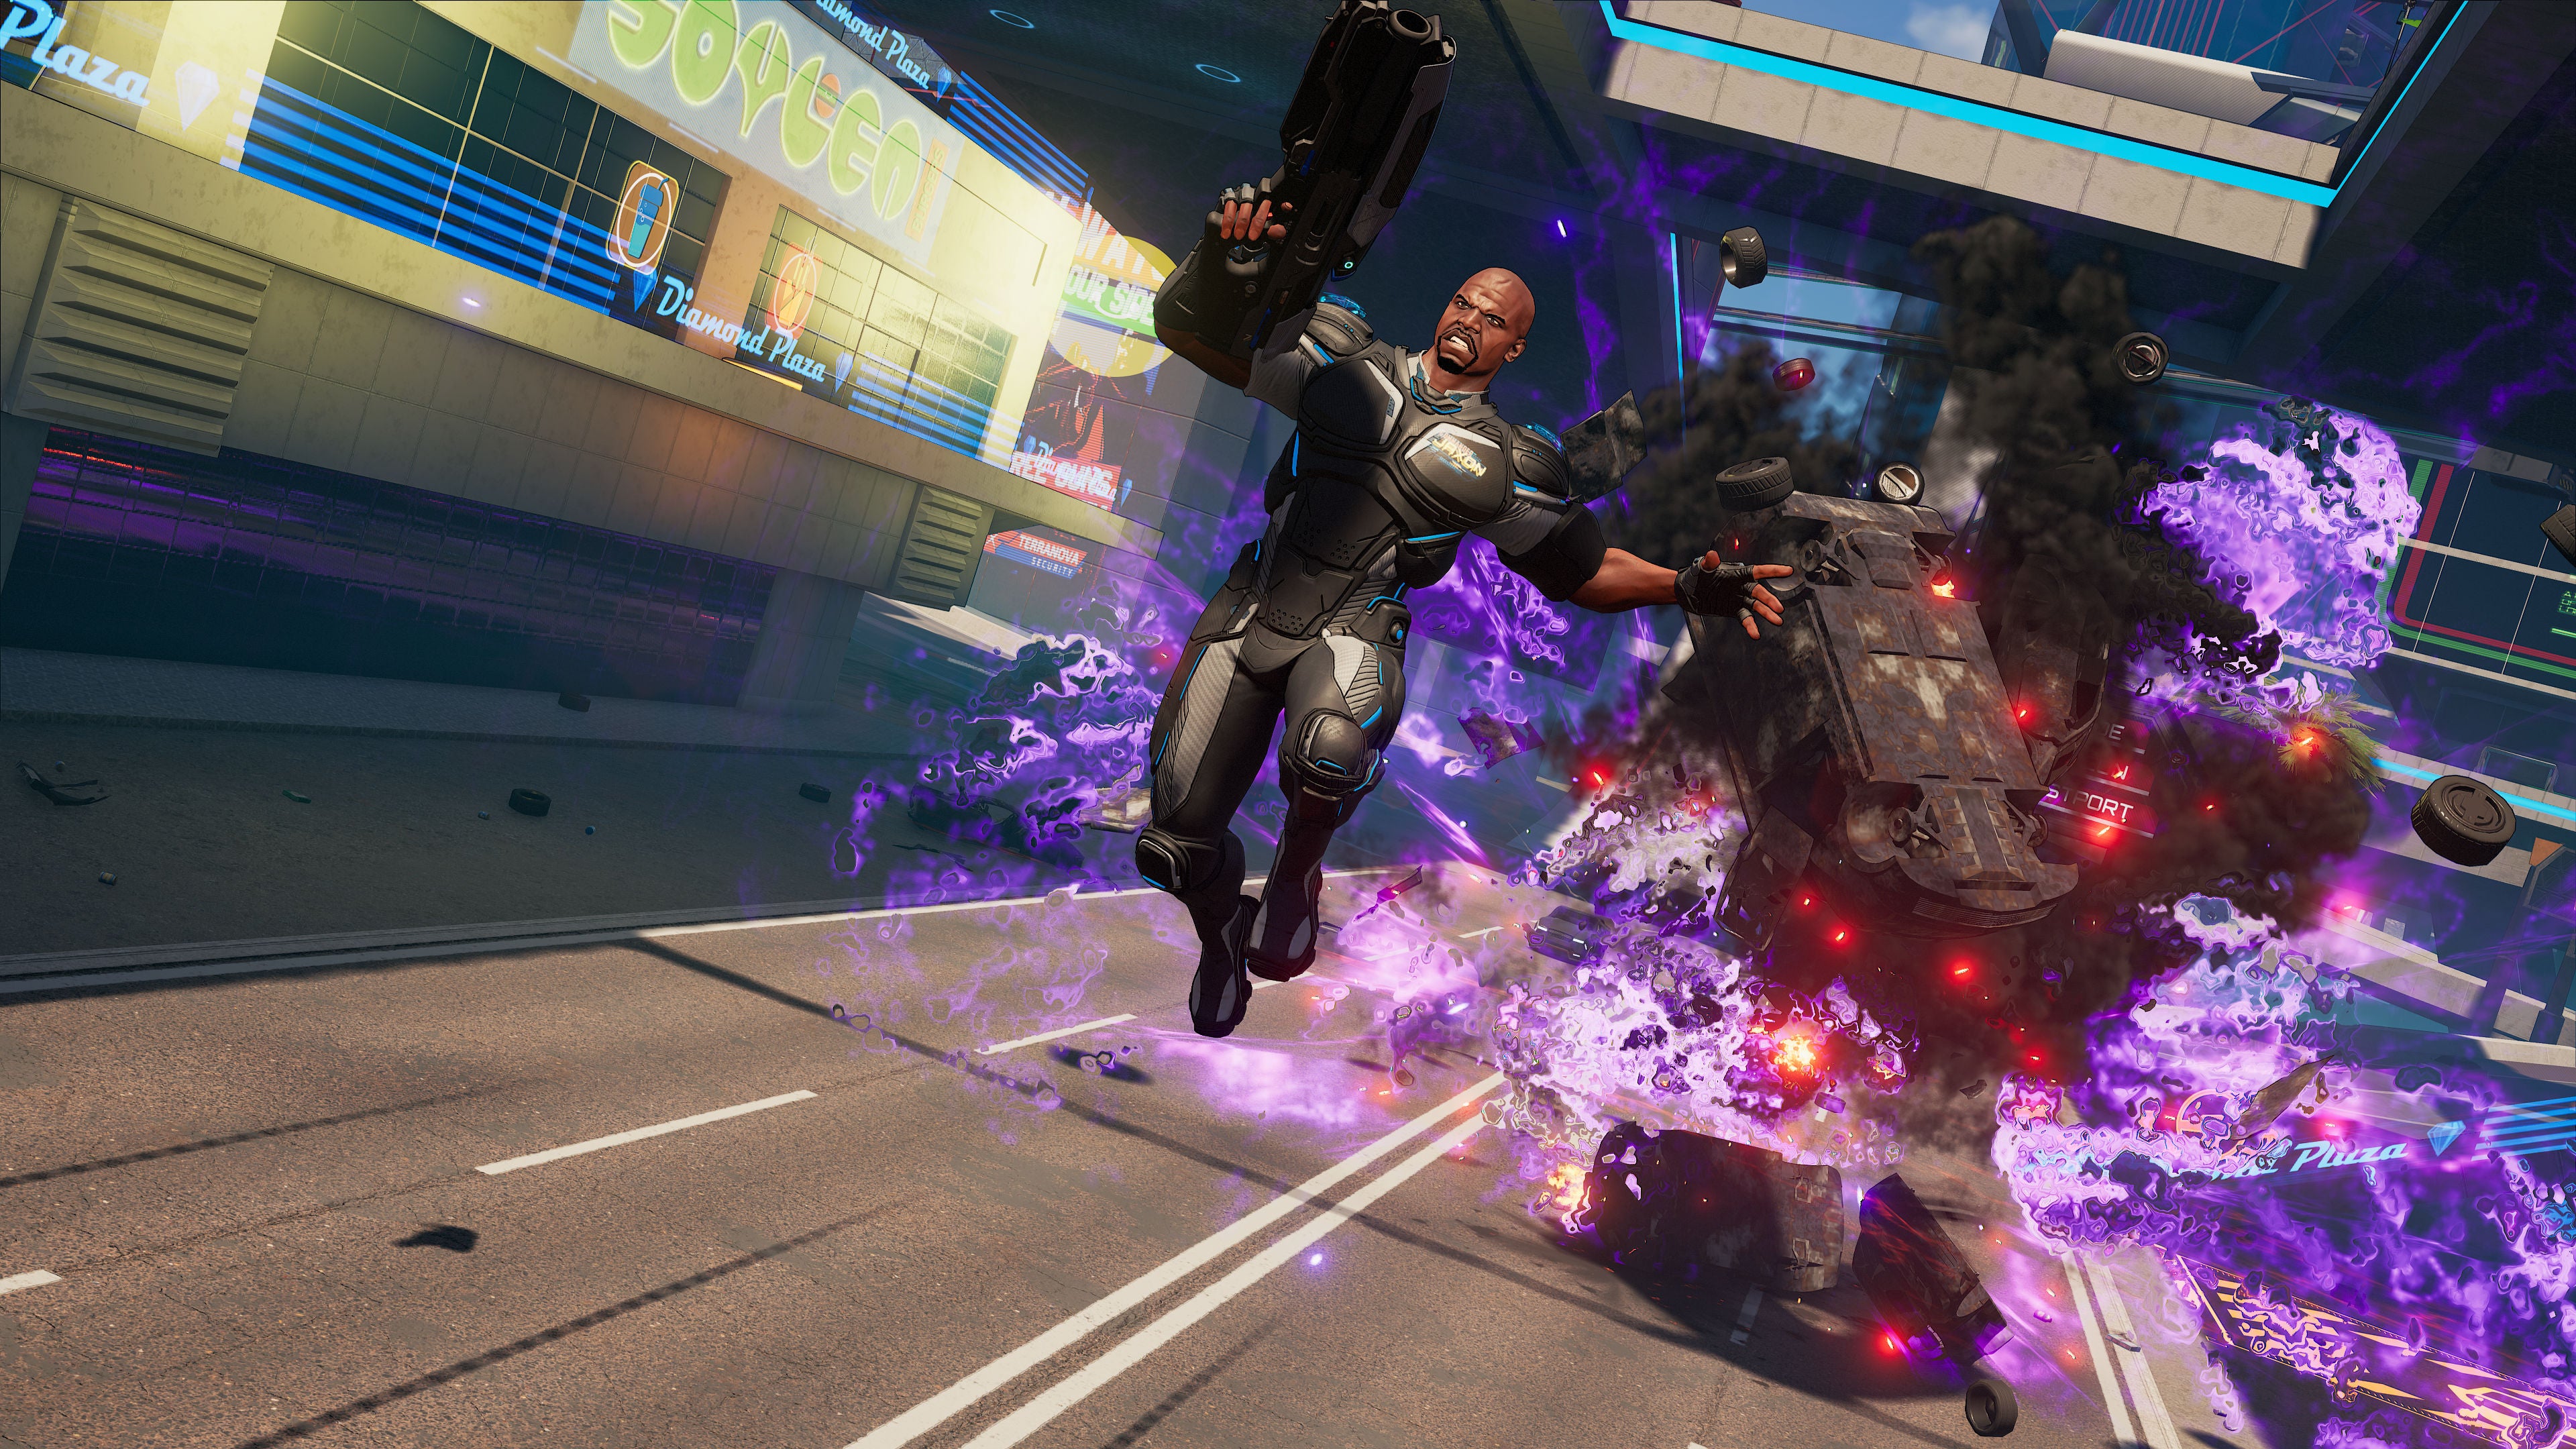 Image for Four years later, Crackdown 3's multiplayer Wrecking Zone is a shadow of its former self